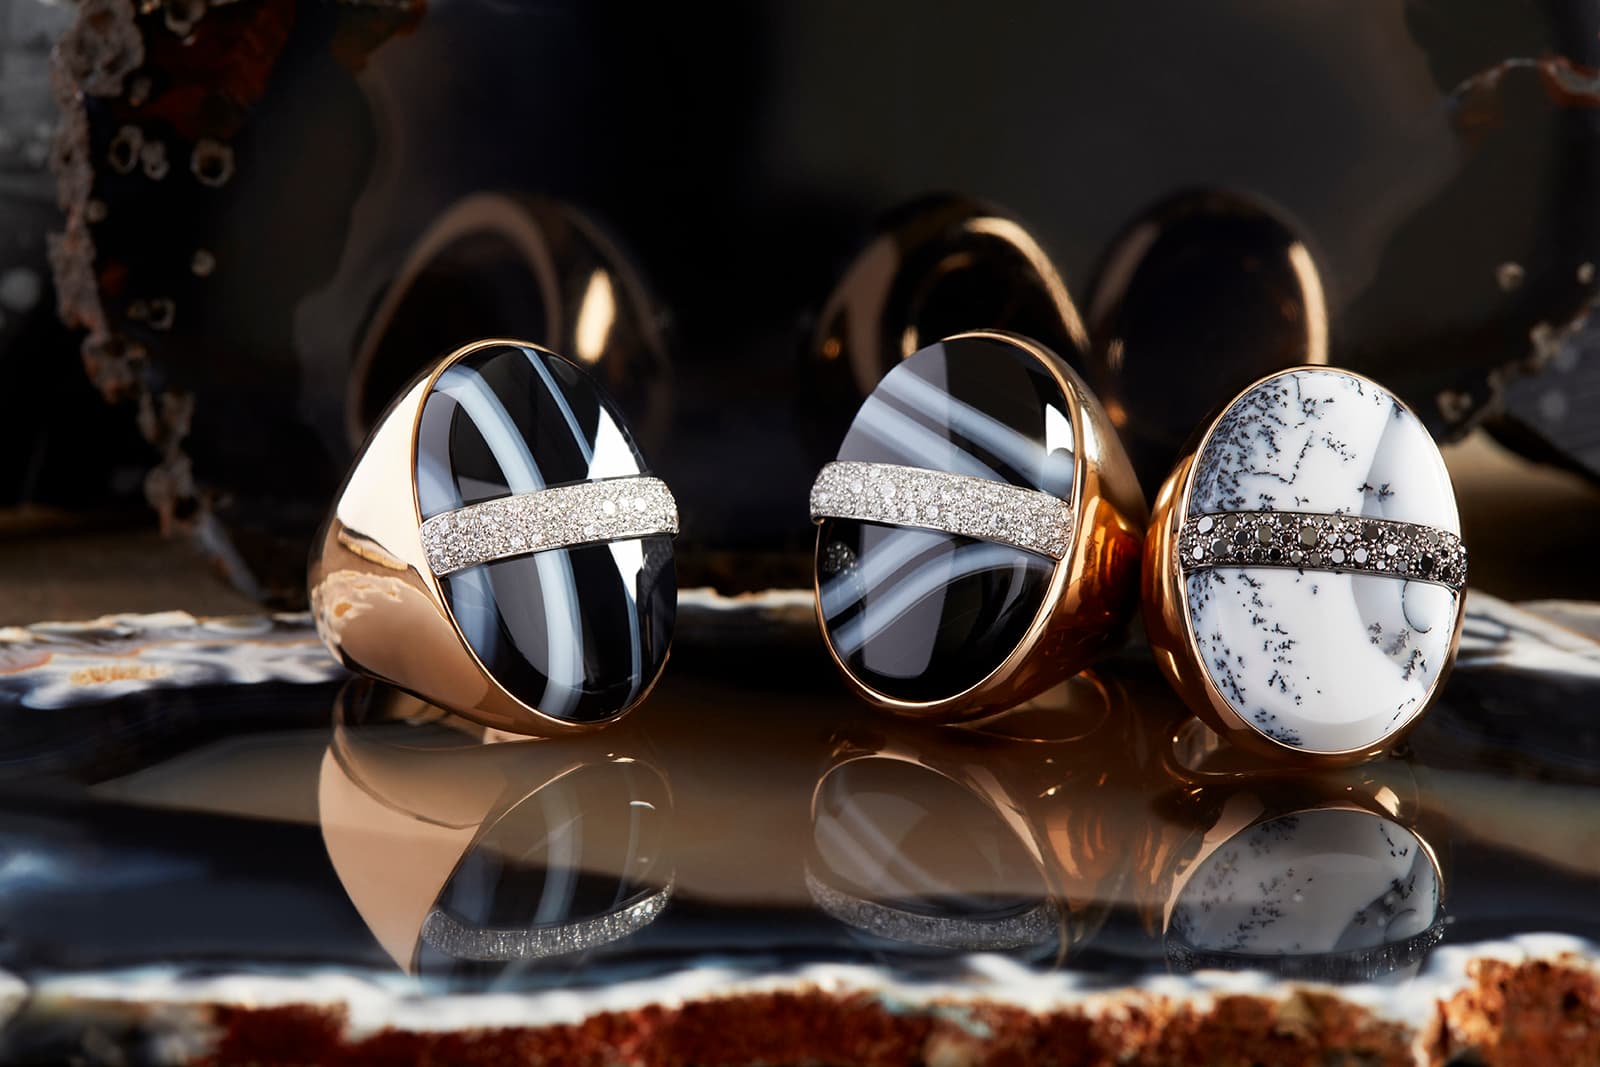 Pomellato Imperial Zebra rings with black and white agate and diamonds, and Japanese Samurai ring with dendritic opal and black diamonds, all in rose gold 